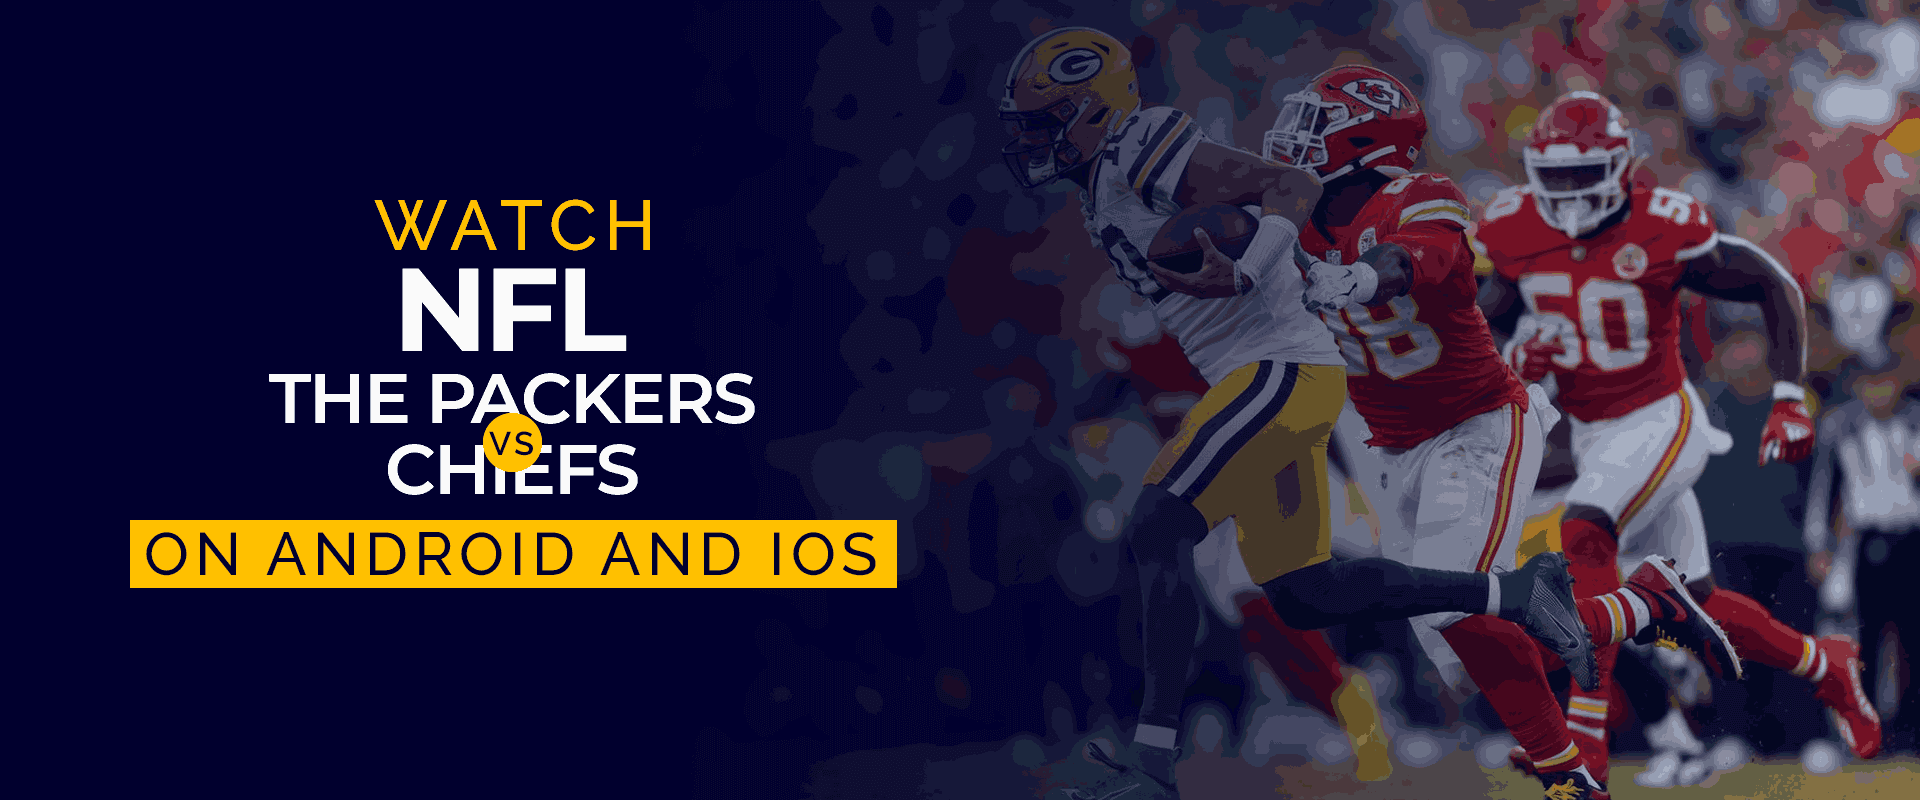 Kuckt NFL The Packers Vs Chiefs op Android an iOS